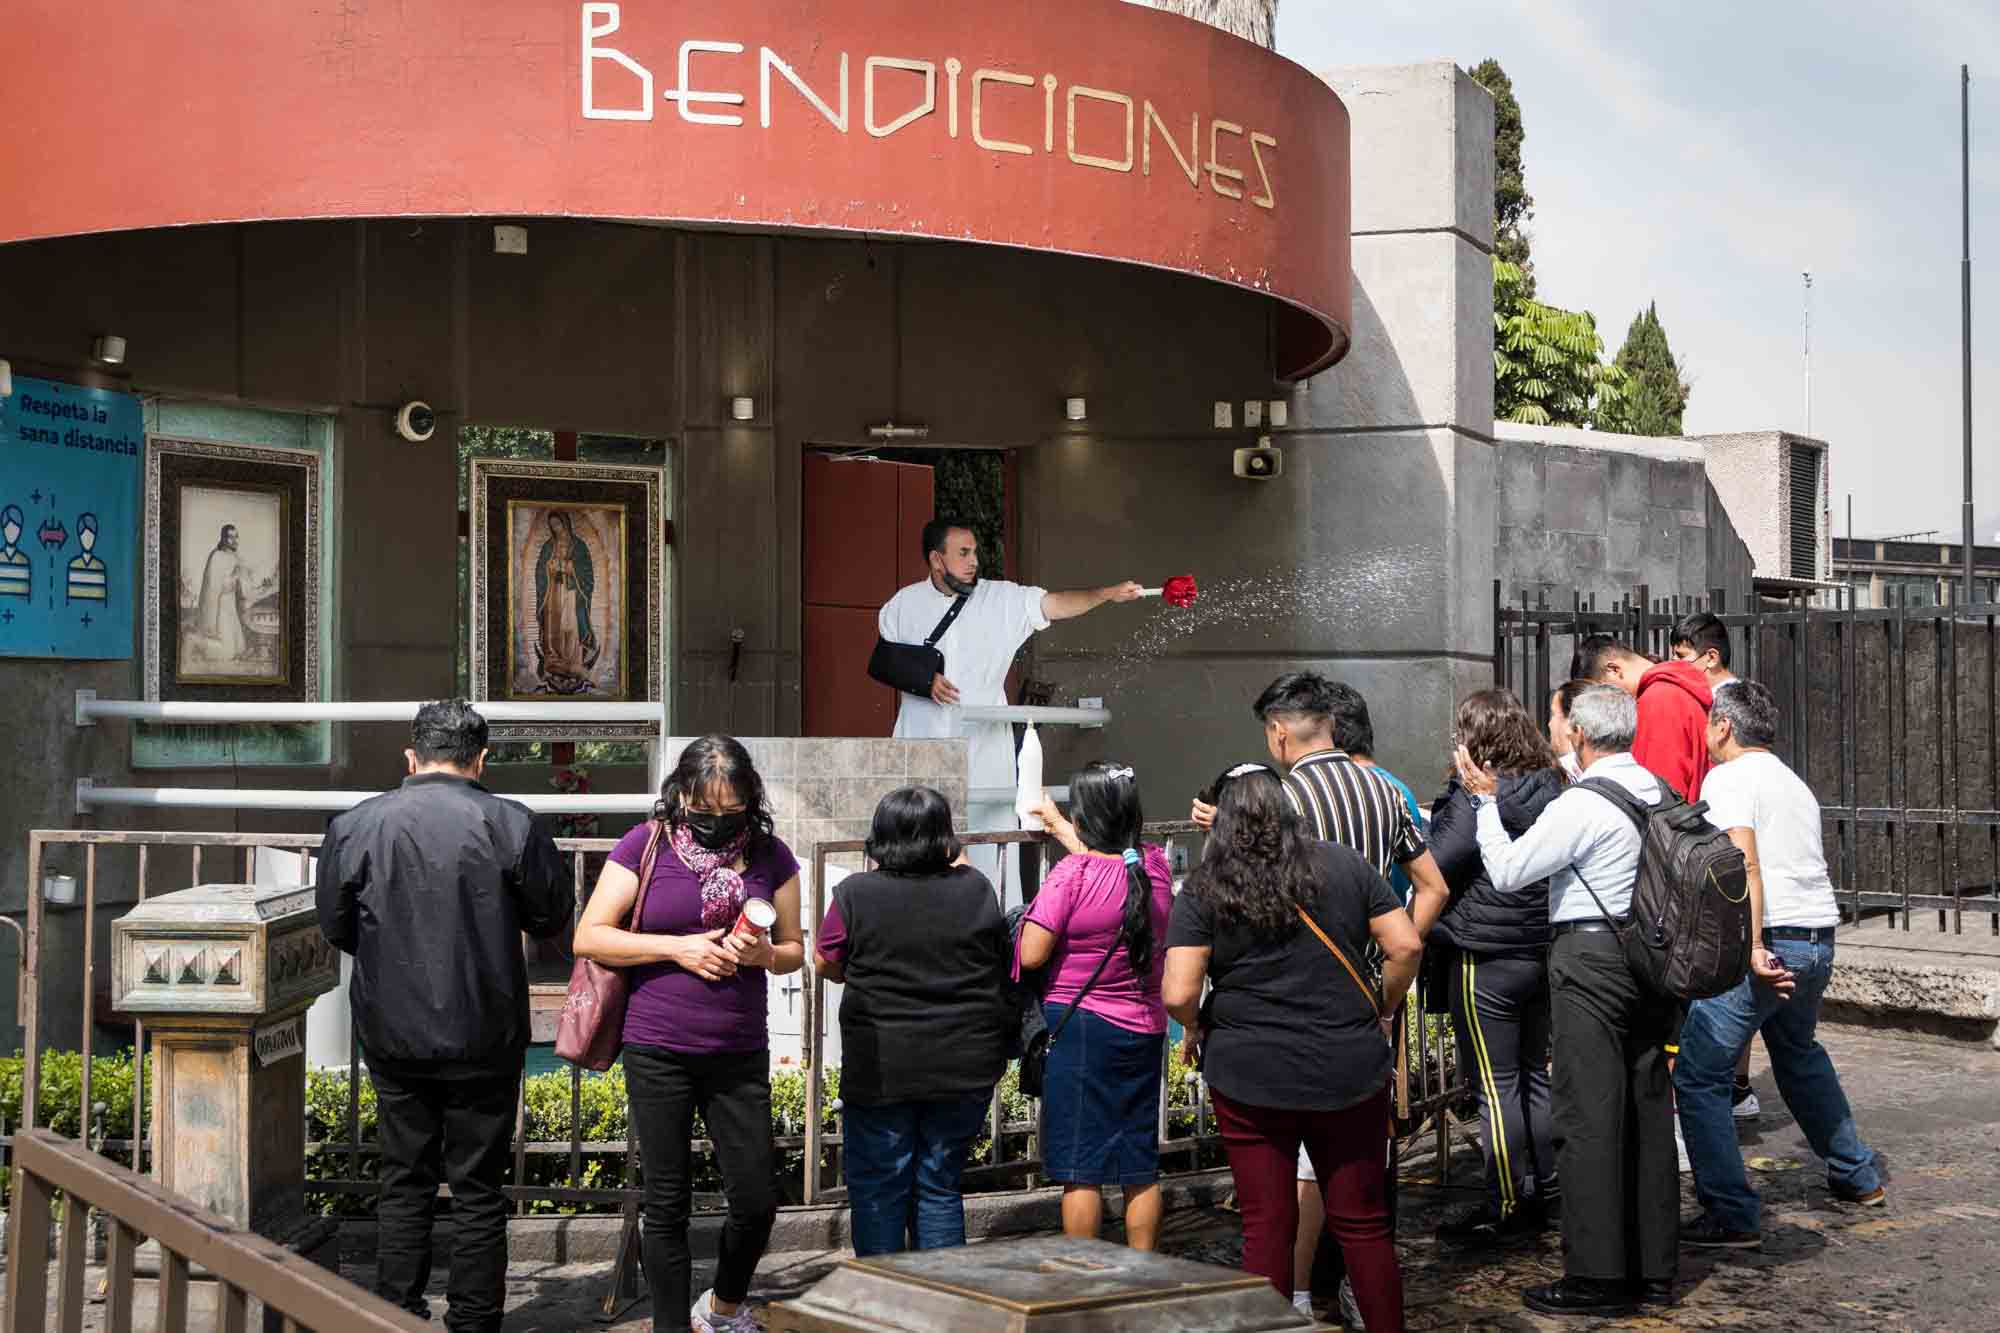 A priest performs a blessing with water on a group of parishoners outside the Basilica of Our Lady of Guadalupe in Mexico City